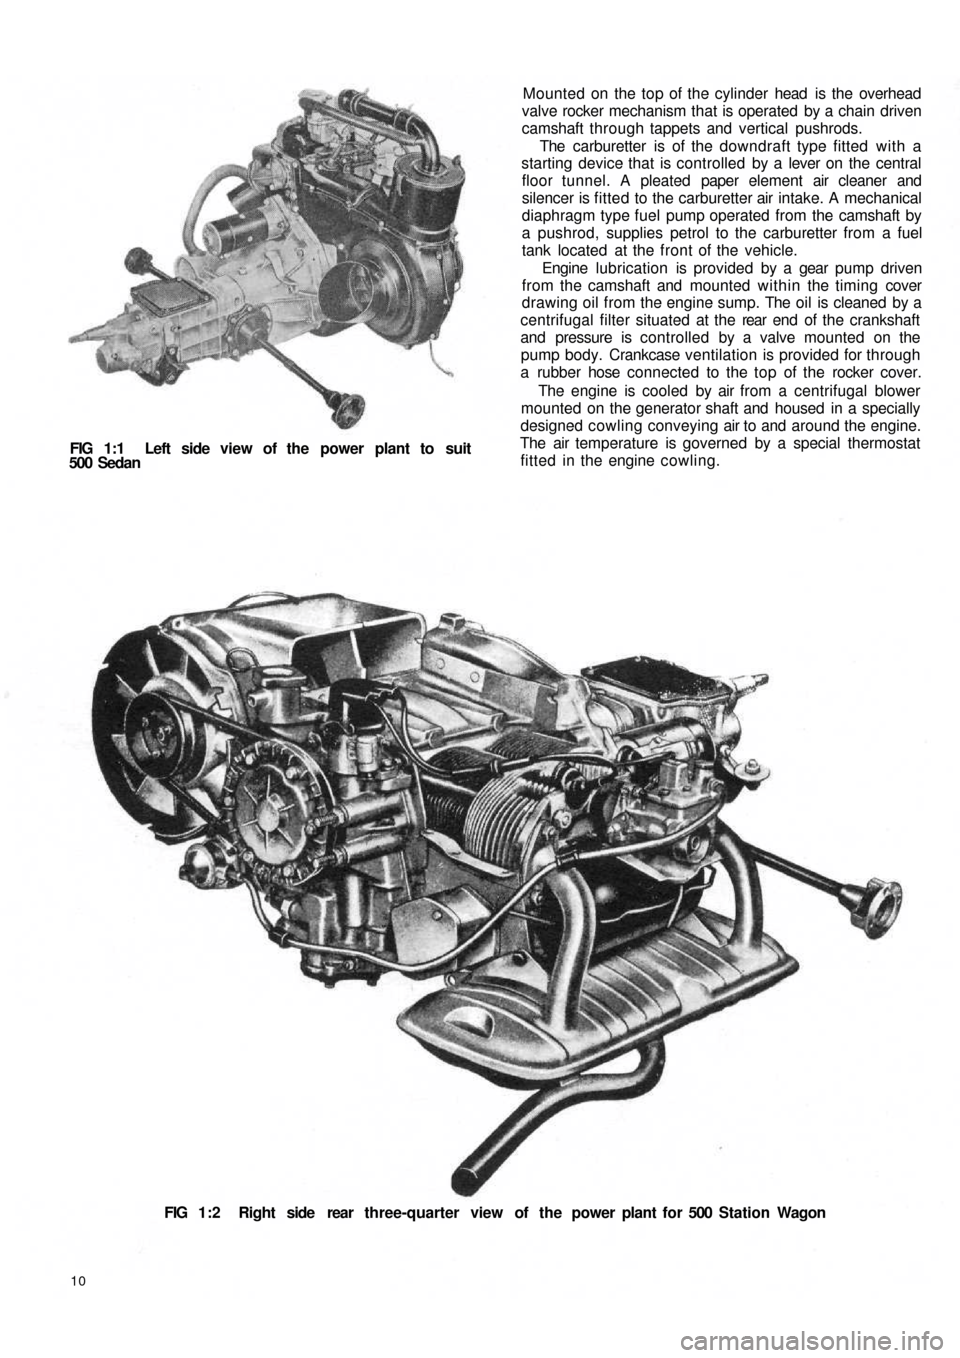 FIAT 500 1970 1.G Workshop Manual FIG 1:1  Left side view of the power plant to suit
500  Sedan
10
FIG 1:2  Right side  rear  three-quarter view of the power plant for 500 Station  Wagon Mounted on the top of the cylinder  head  is th